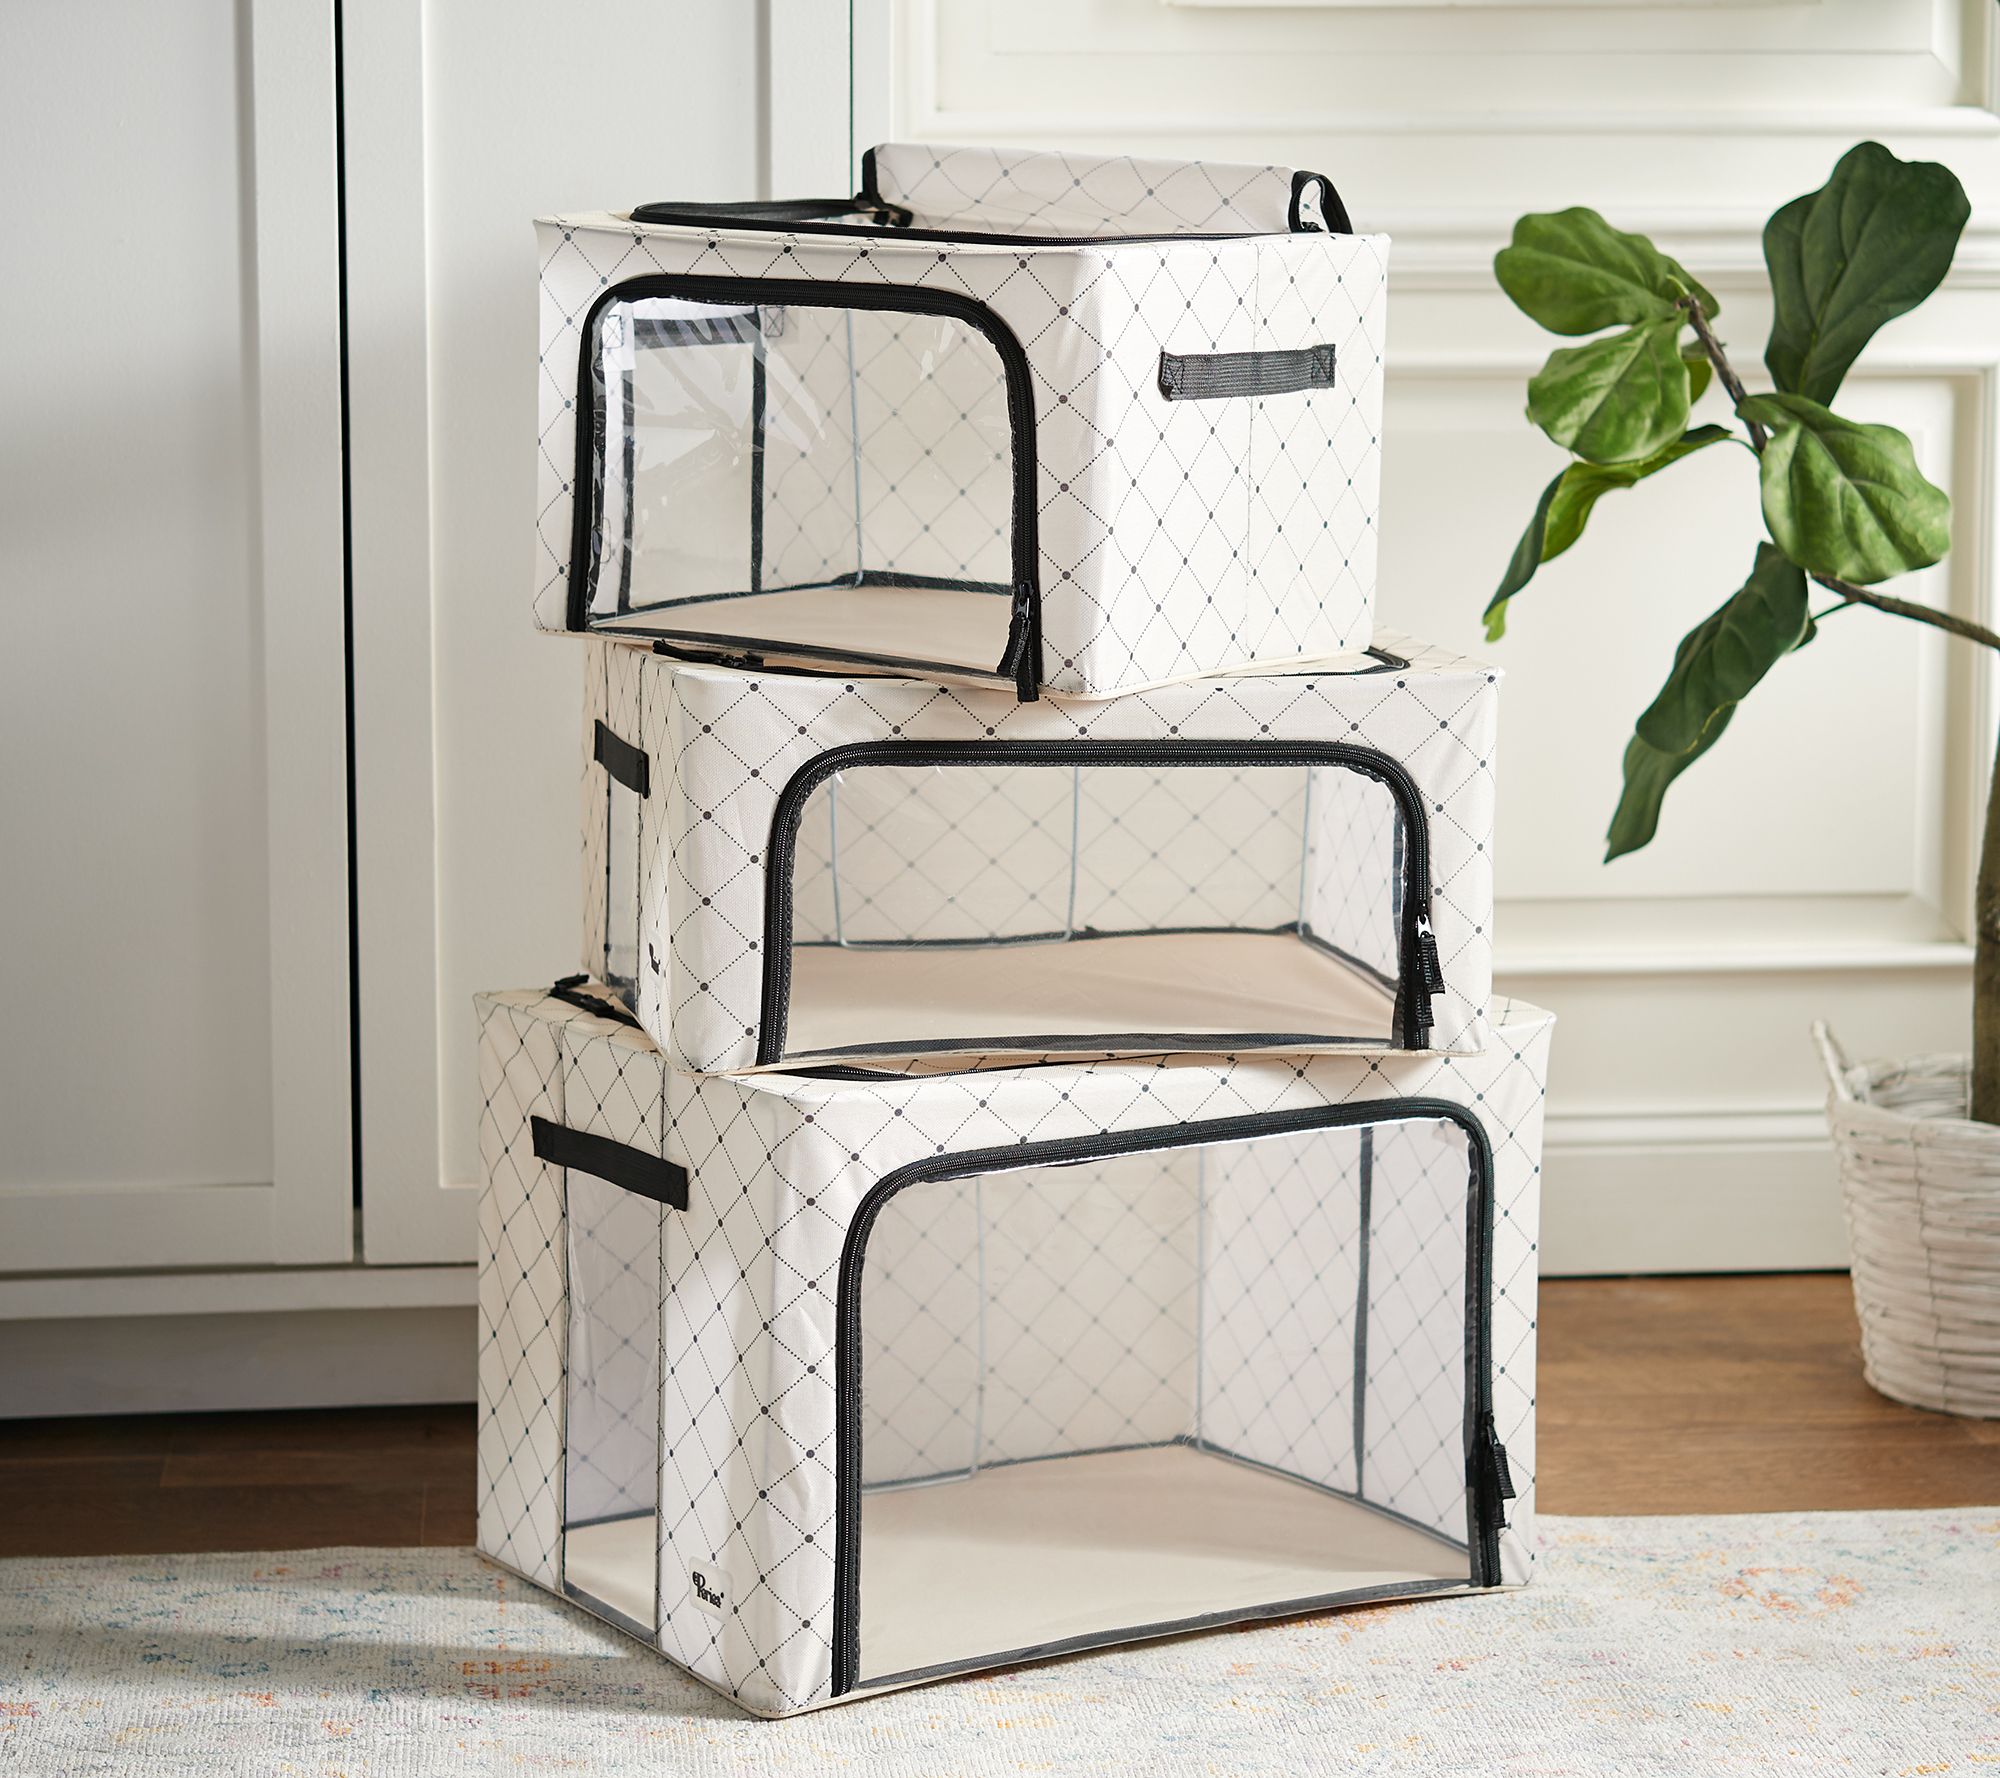 Periea Set of 3 Small or Large Collapsible Storage Boxes 